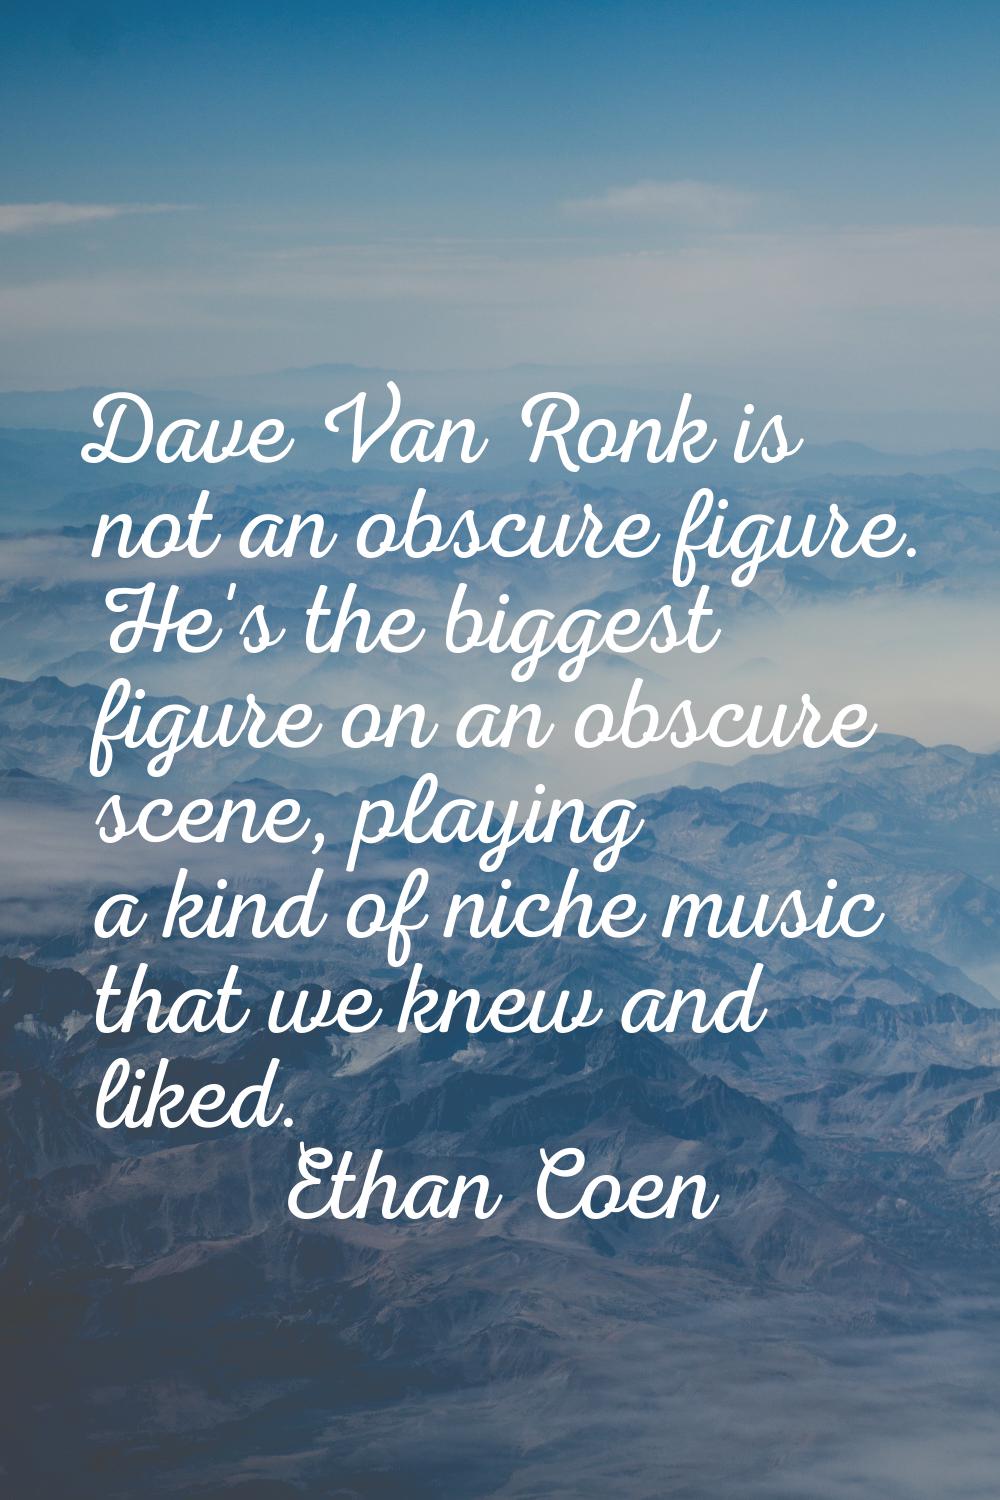 Dave Van Ronk is not an obscure figure. He's the biggest figure on an obscure scene, playing a kind